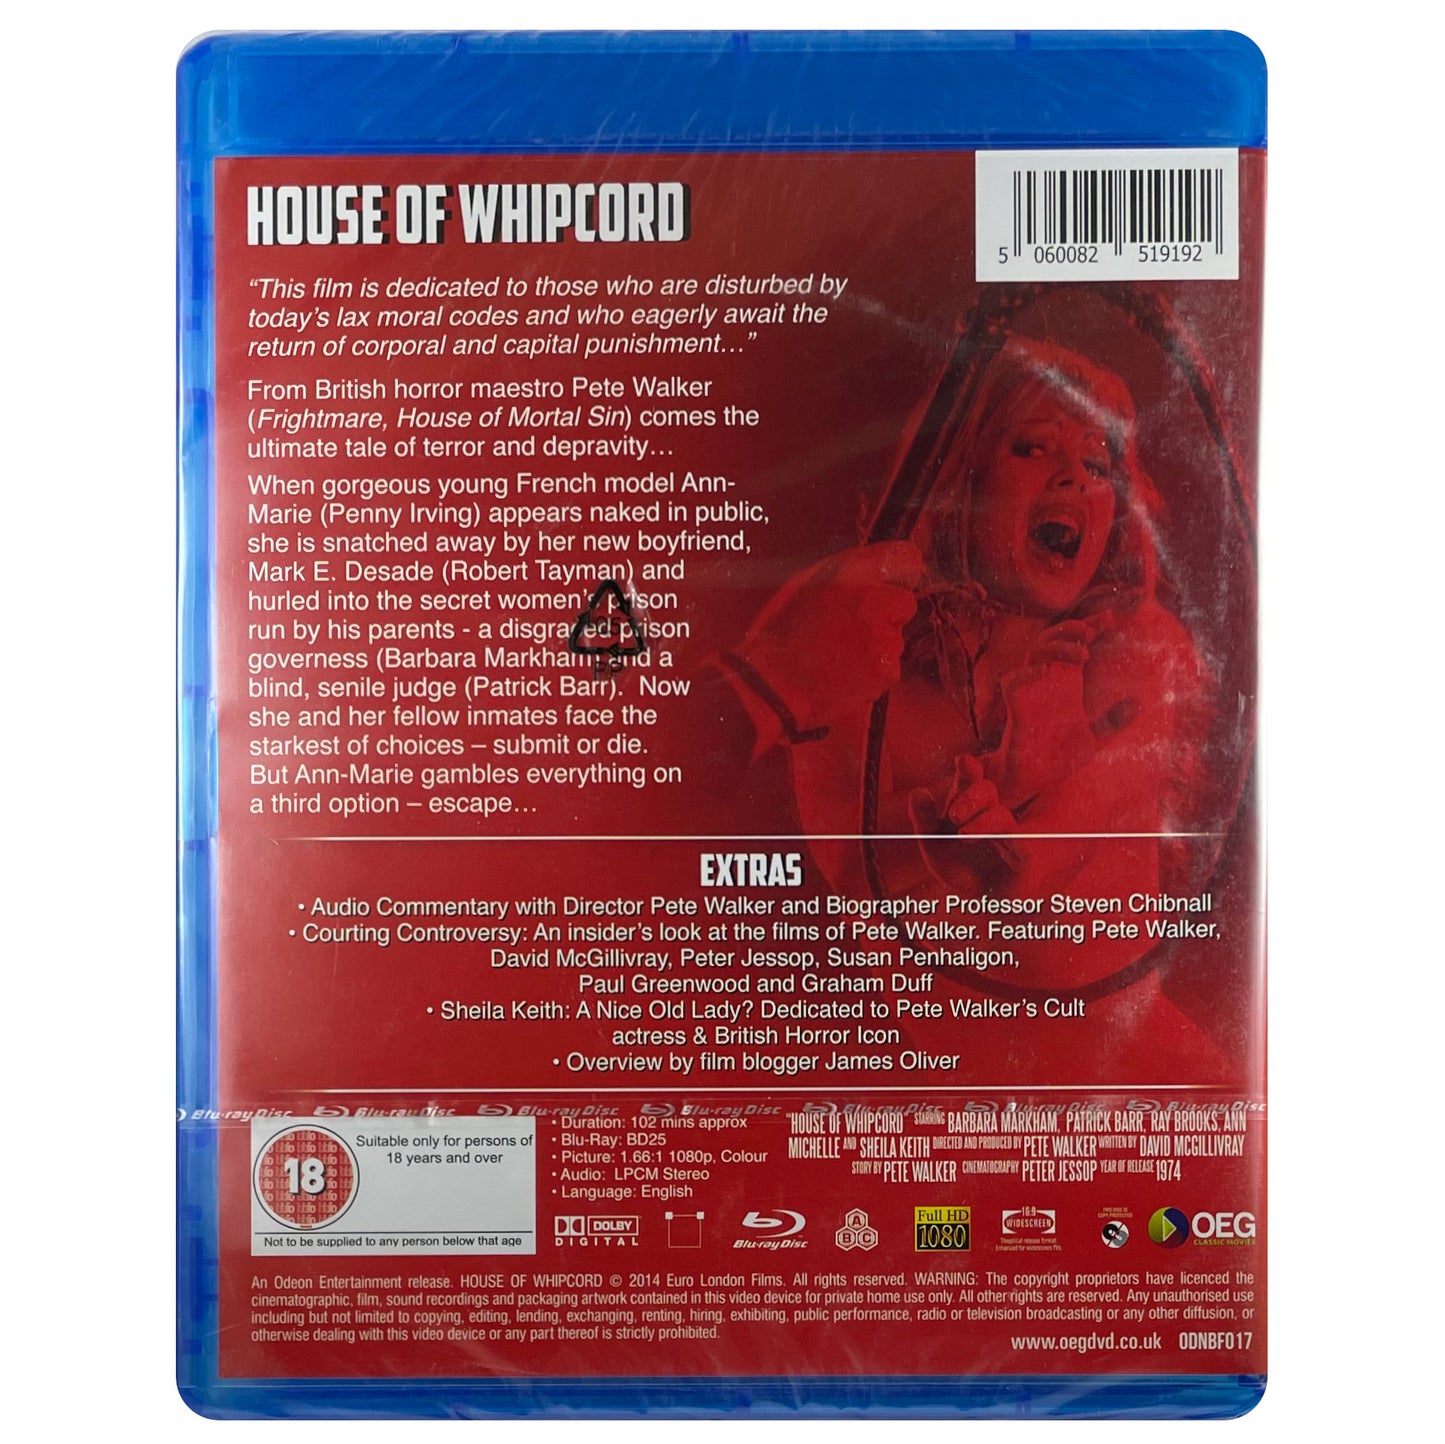 House of Whipcord Blu-Ray